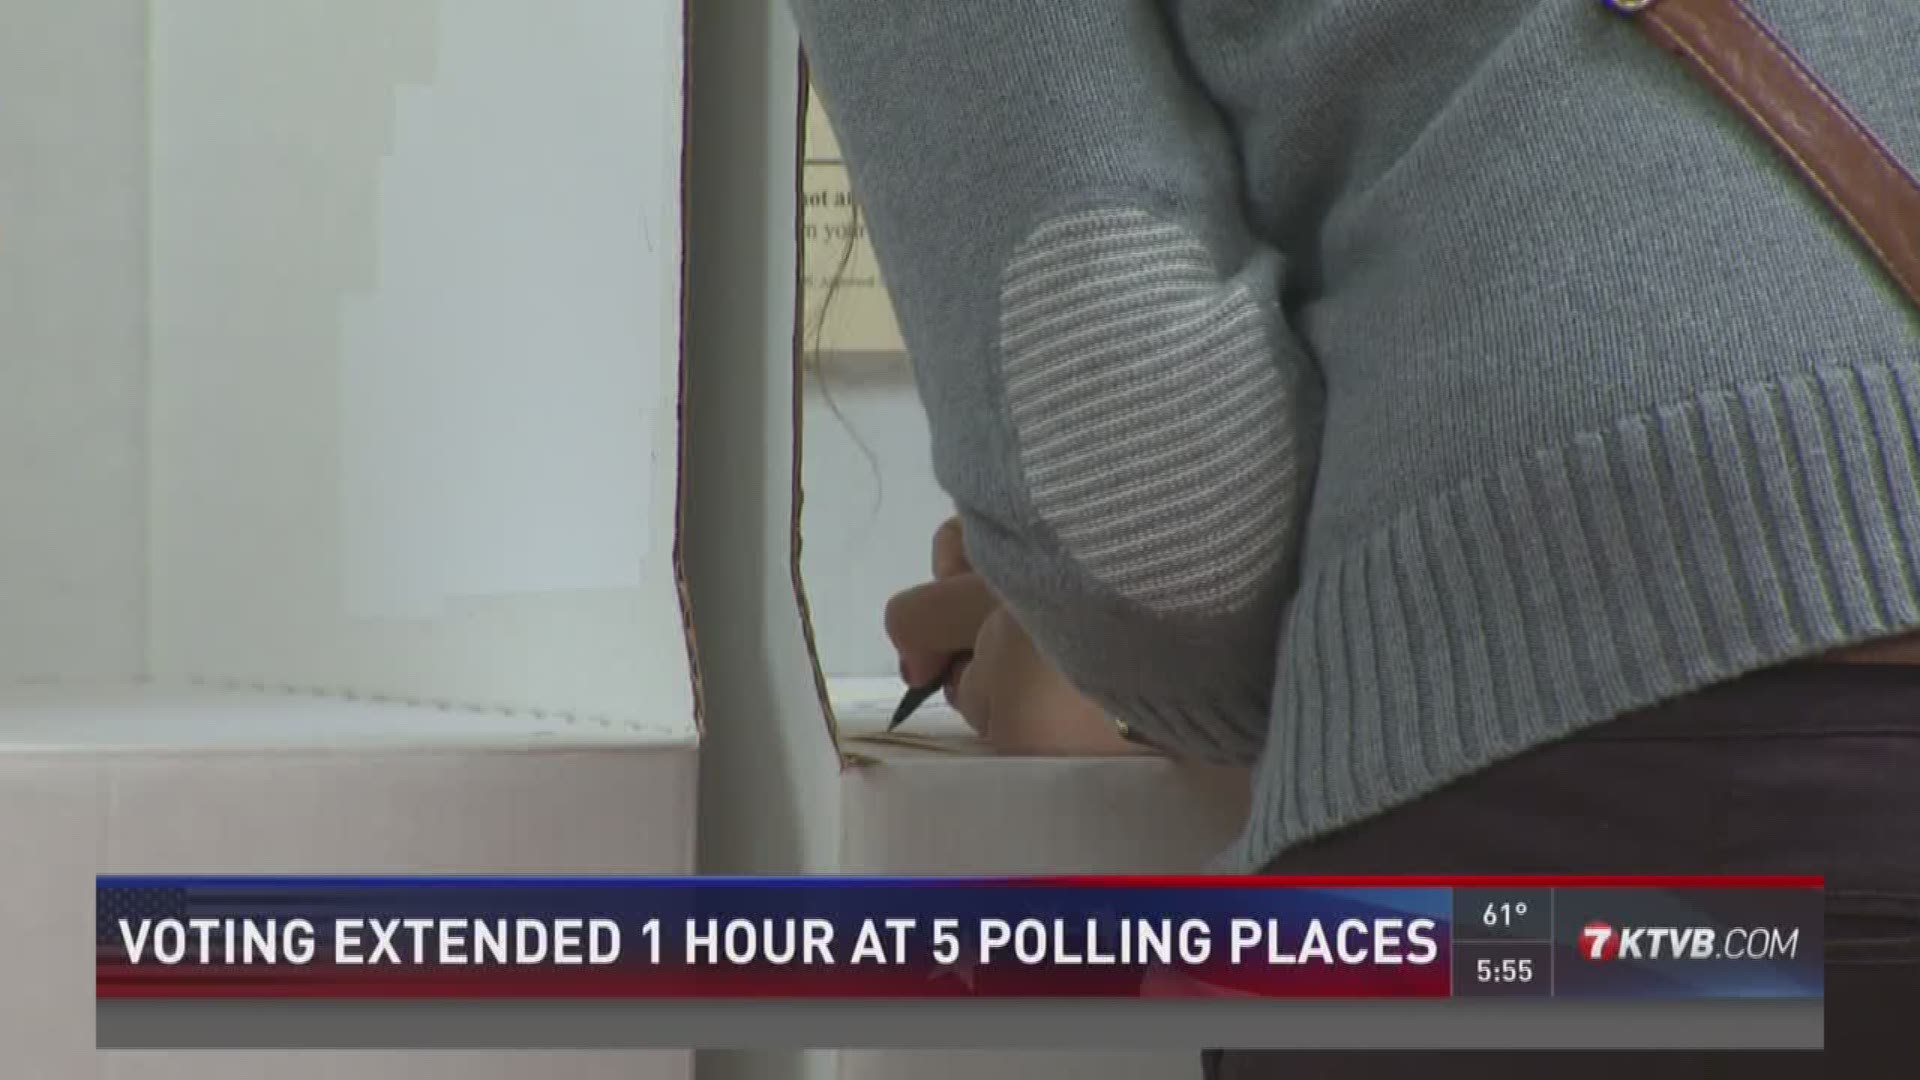 Voting extended by 1 hour at 5 polling places.